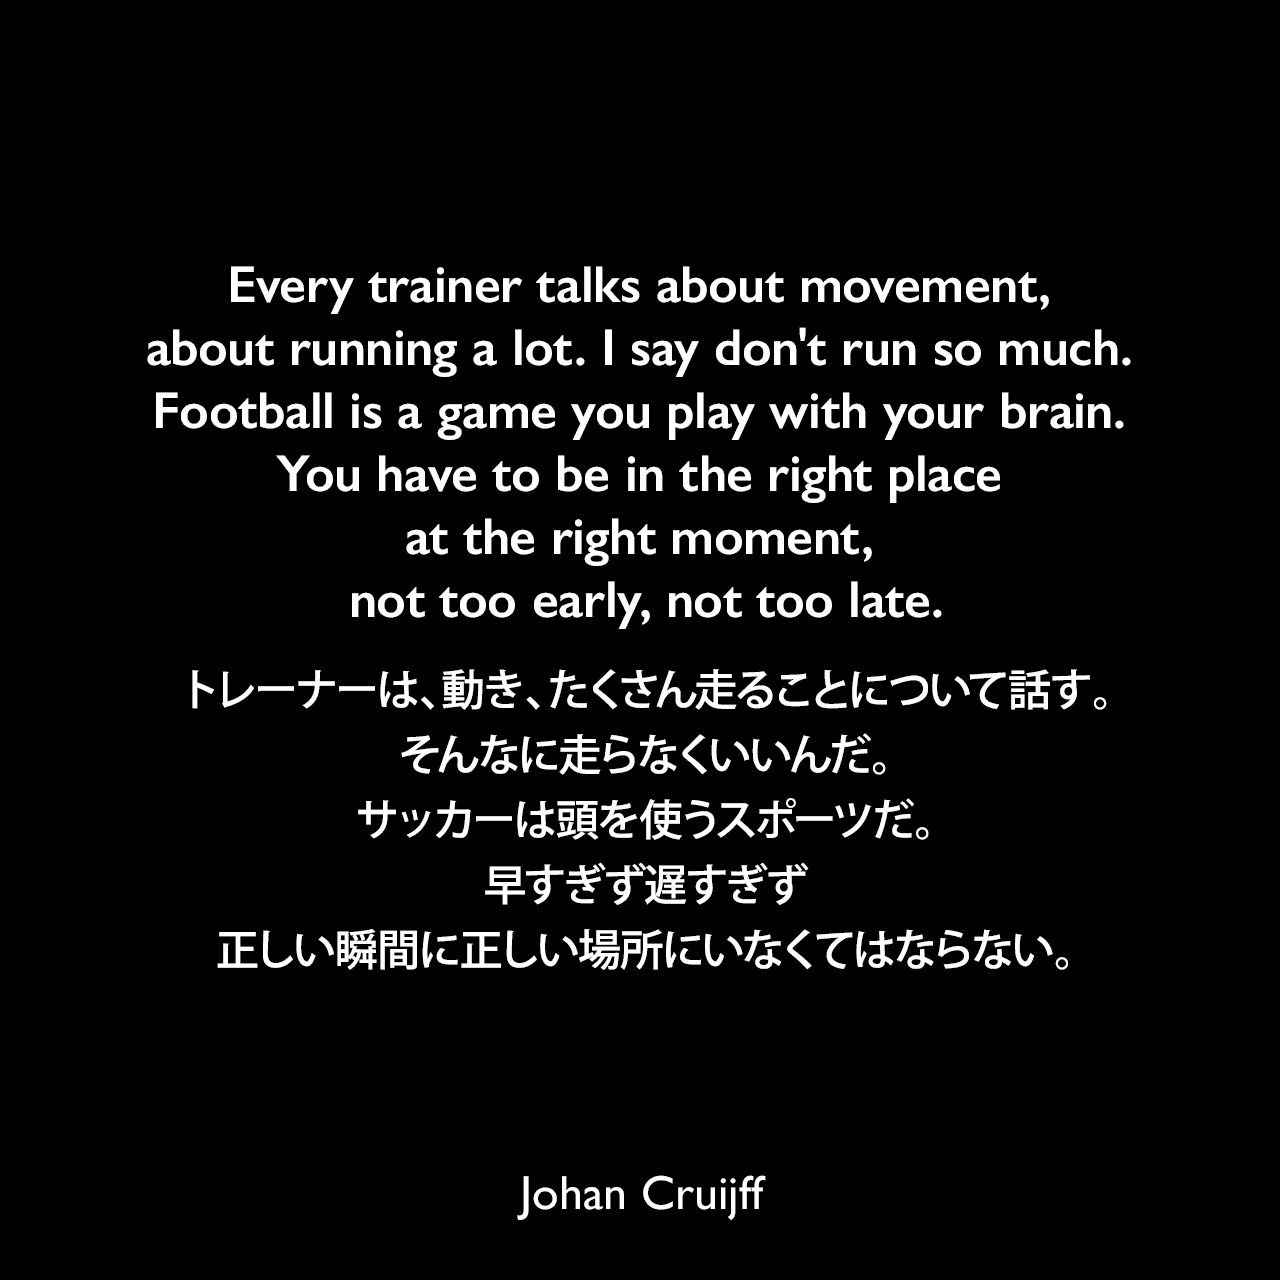 Every trainer talks about movement, about running a lot. I say don't run so much. Football is a game you play with your brain. You have to be in the right place at the right moment, not too early, not too late.トレーナーは、動き、たくさん走ることについて話す。そんなに走らなくいいんだ。サッカーは頭を使うスポーツだ。早すぎず遅すぎず、正しい瞬間に正しい場所にいなくてはならない。- デイビット・ウィナーによる本「Brilliant Orange: The Neurotic Genius of Dutch Football」よりJohan Cruijff